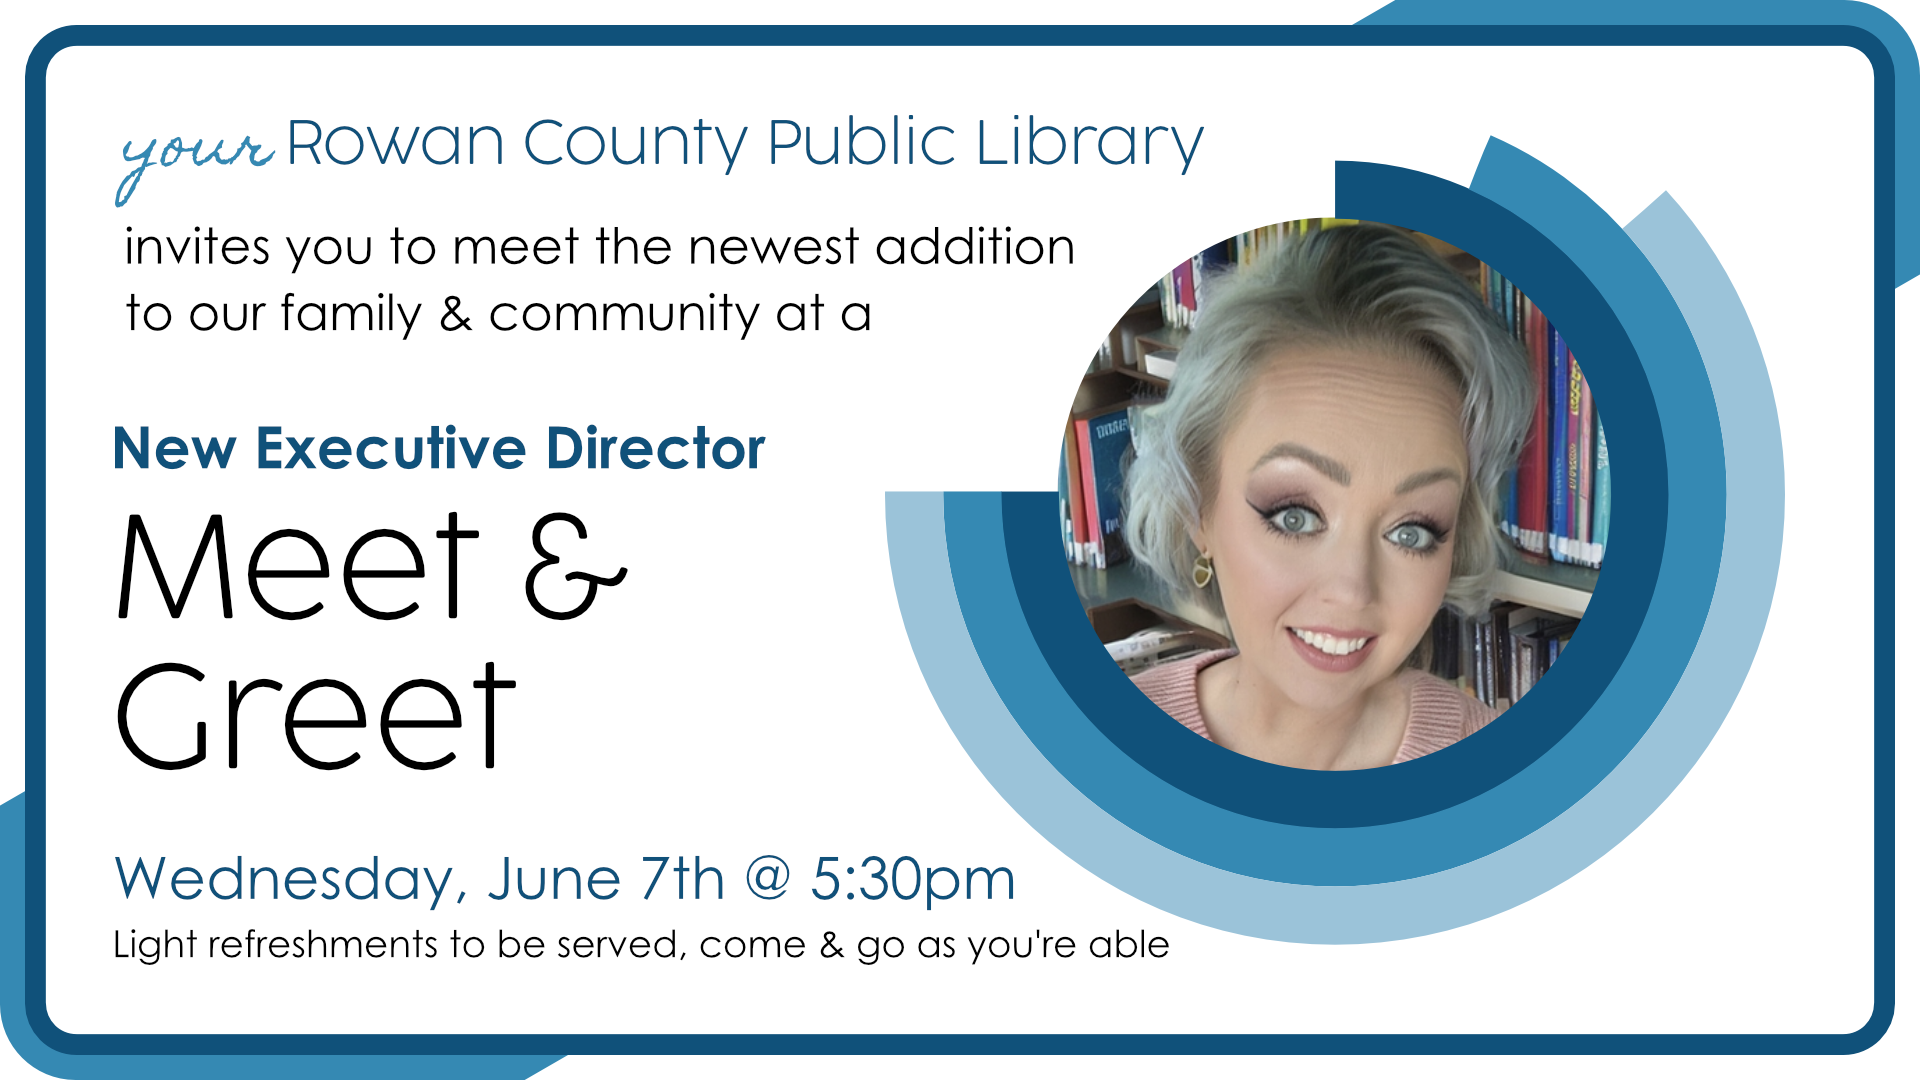 Come meet the library's new executive director, Jasmyne Lewis, starting at 5:30pm June 7th!